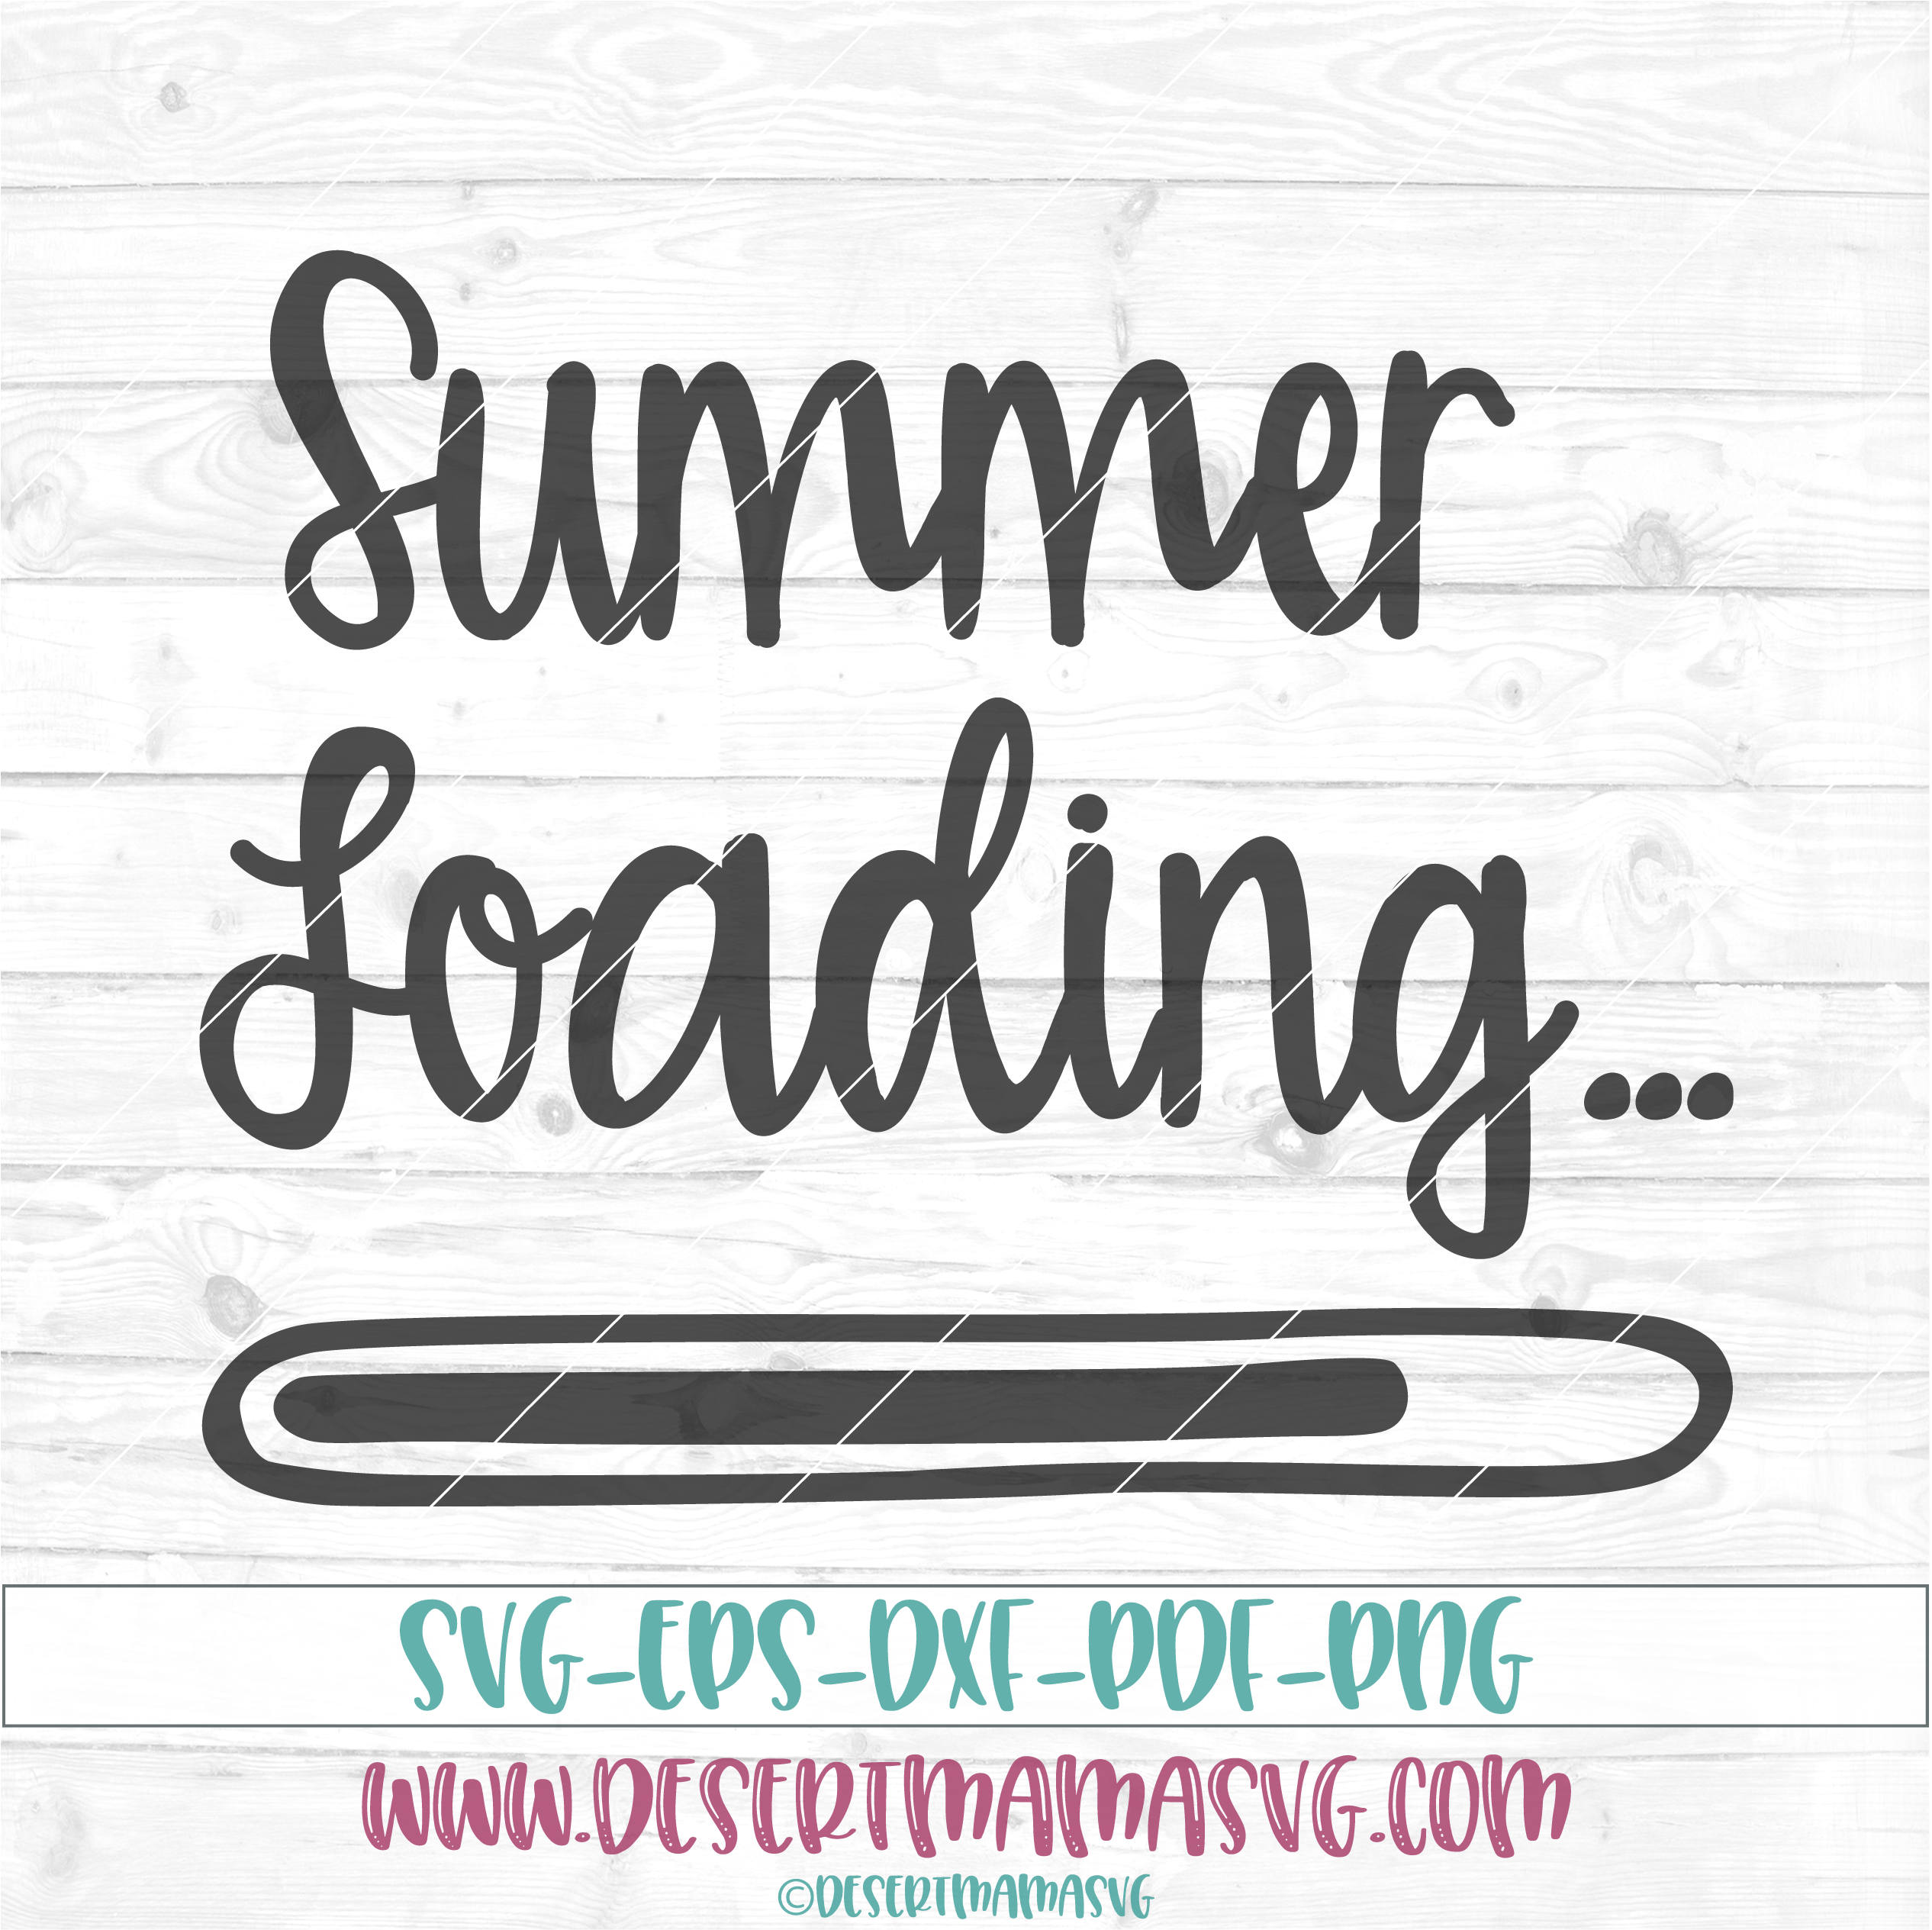 Download Summer Loading svg eps dxf png cricut cameo scan N cut